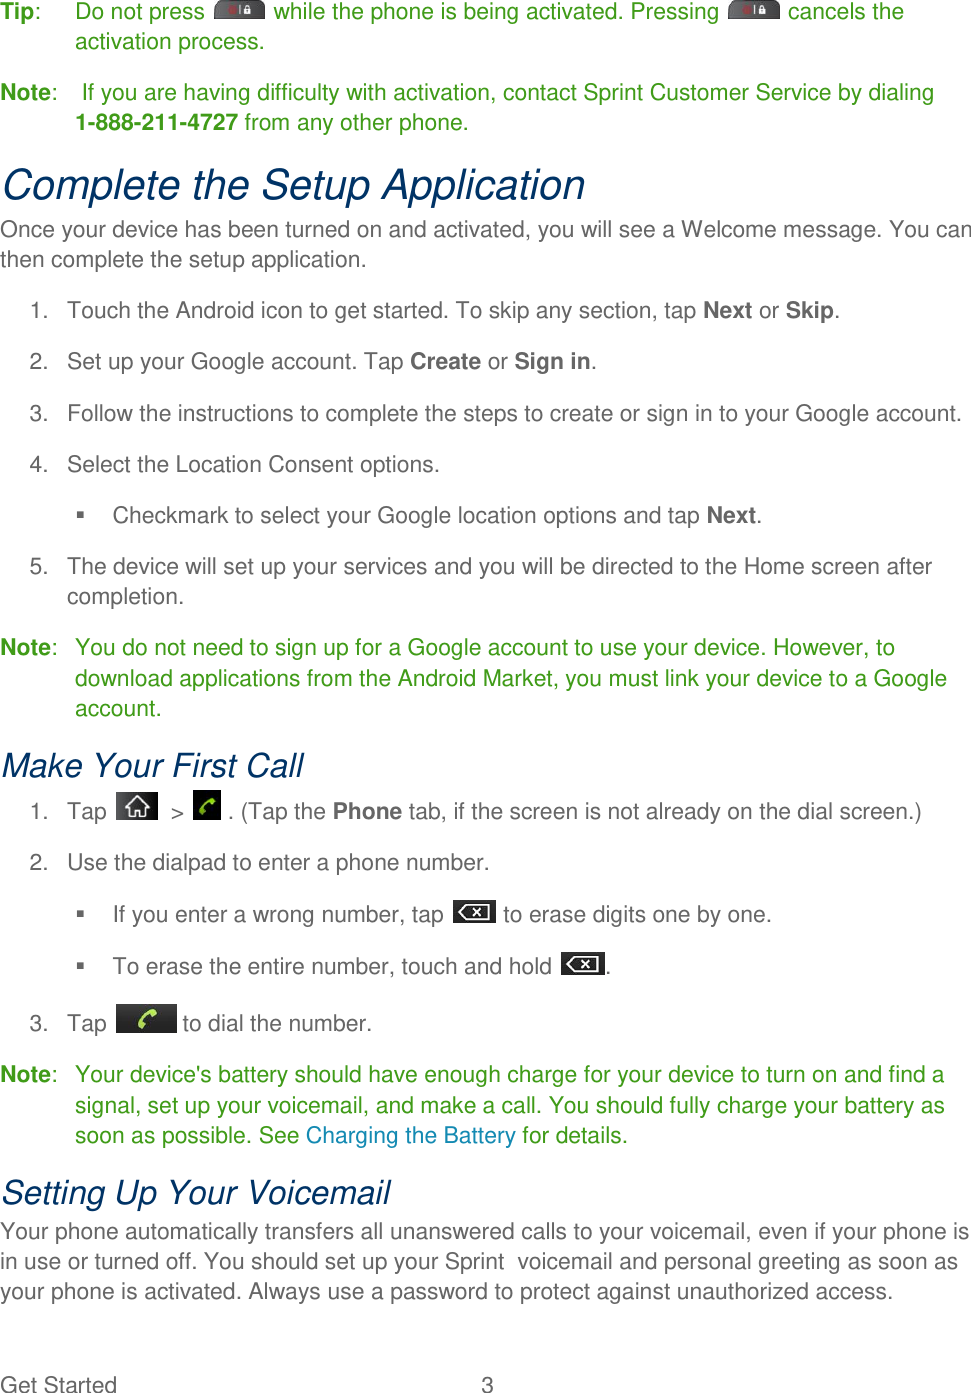 Get Started  3 Tip:   Do not press   while the phone is being activated. Pressing   cancels the activation process. Note:   If you are having difficulty with activation, contact Sprint Customer Service by dialing  1-888-211-4727 from any other phone. Complete the Setup Application Once your device has been turned on and activated, you will see a Welcome message. You can then complete the setup application. 1.  Touch the Android icon to get started. To skip any section, tap Next or Skip. 2.  Set up your Google account. Tap Create or Sign in. 3.  Follow the instructions to complete the steps to create or sign in to your Google account. 4.  Select the Location Consent options.   Checkmark to select your Google location options and tap Next. 5.  The device will set up your services and you will be directed to the Home screen after completion. Note:   You do not need to sign up for a Google account to use your device. However, to download applications from the Android Market, you must link your device to a Google account. Make Your First Call 1.  Tap    &gt;   . (Tap the Phone tab, if the screen is not already on the dial screen.) 2.  Use the dialpad to enter a phone number.   If you enter a wrong number, tap   to erase digits one by one.   To erase the entire number, touch and hold  . 3.  Tap   to dial the number. Note:   Your device&apos;s battery should have enough charge for your device to turn on and find a signal, set up your voicemail, and make a call. You should fully charge your battery as soon as possible. See Charging the Battery for details. Setting Up Your Voicemail Your phone automatically transfers all unanswered calls to your voicemail, even if your phone is in use or turned off. You should set up your Sprint  voicemail and personal greeting as soon as your phone is activated. Always use a password to protect against unauthorized access. 